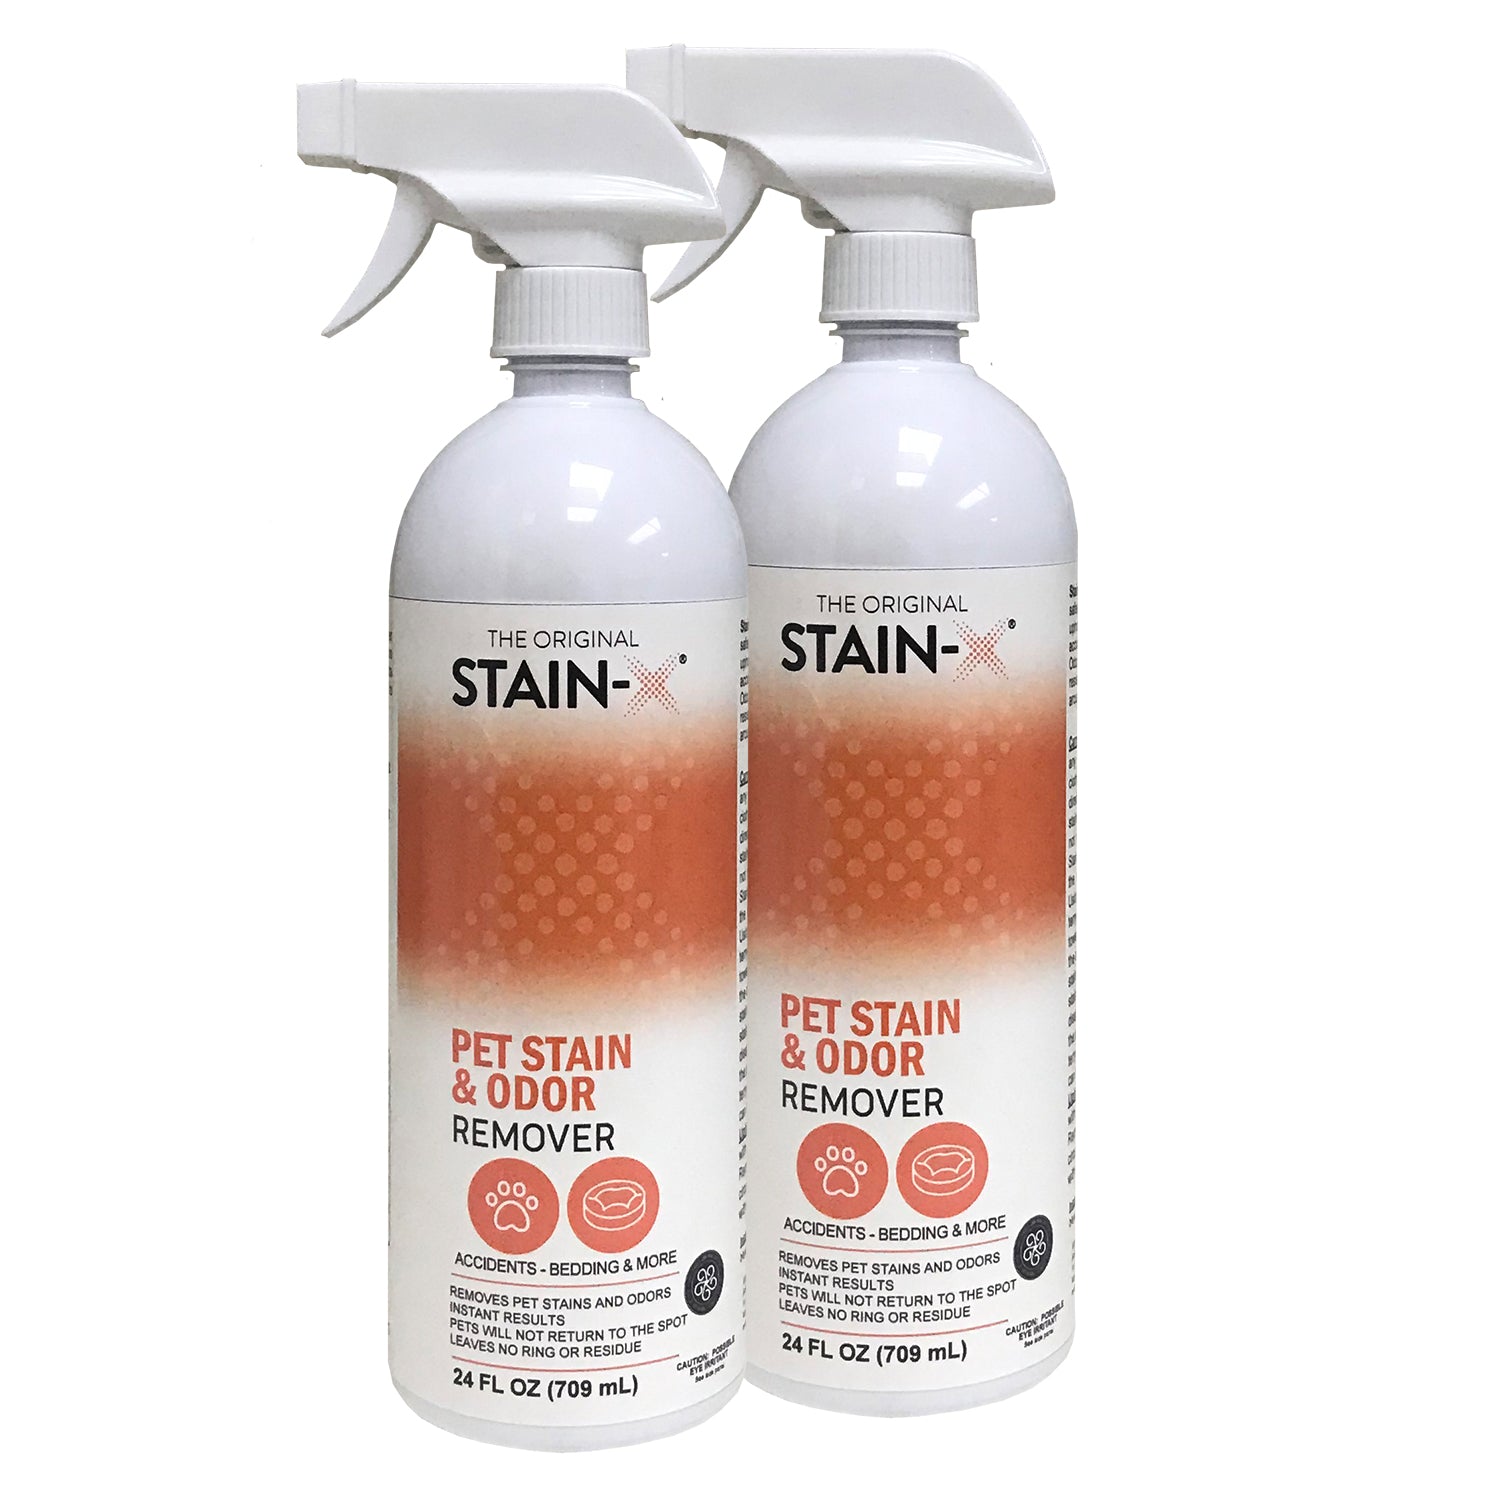 Stain-X Pet Stain & Odor Remover 24 oz